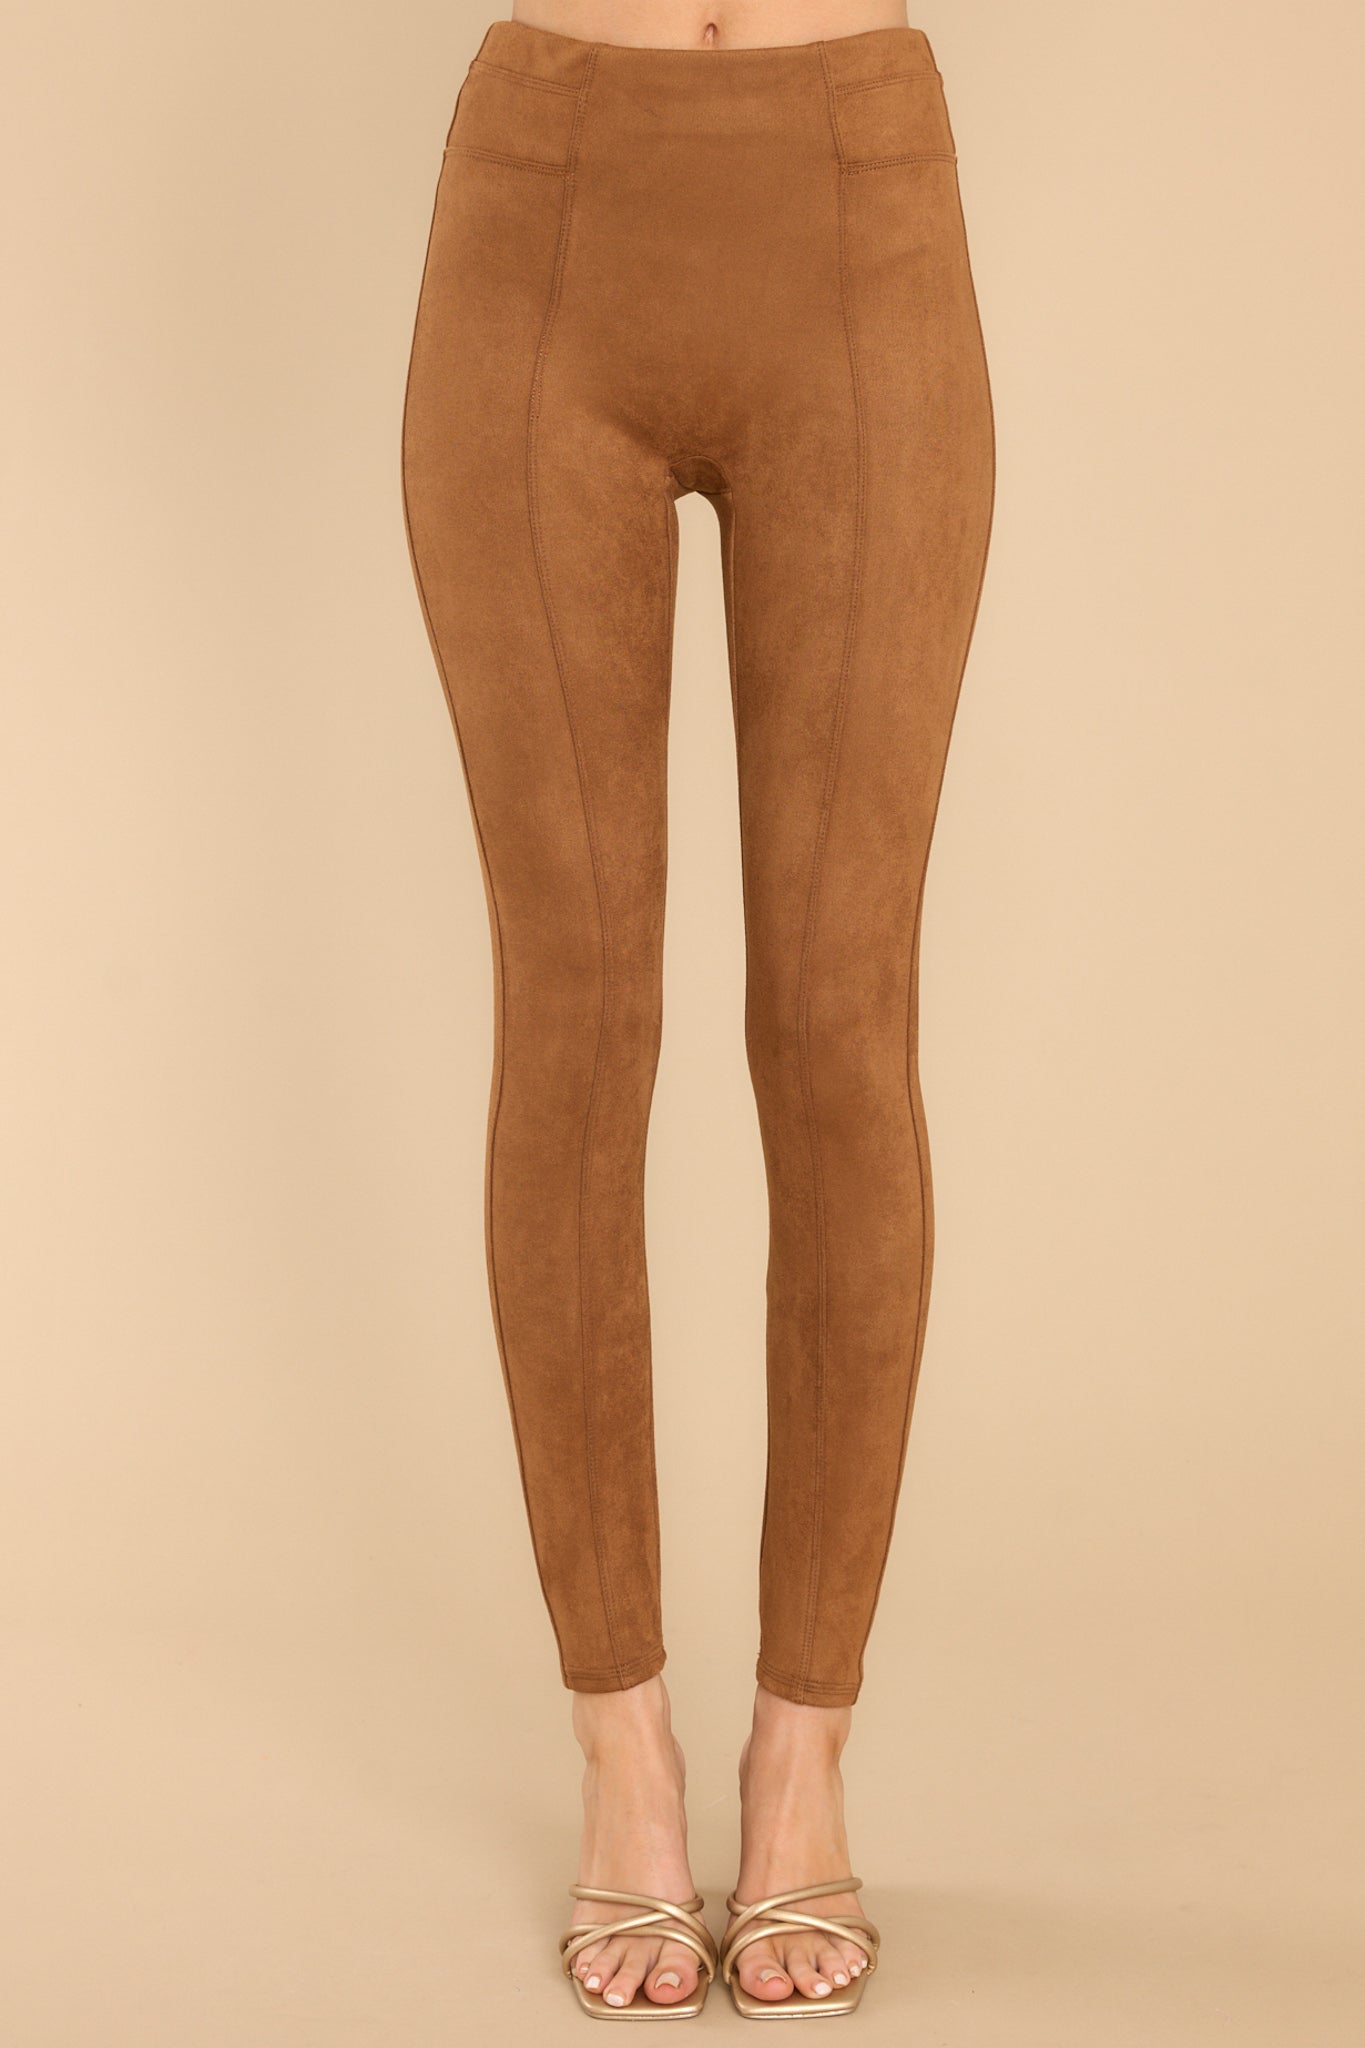 Spanx NWT Faux Suede Leggings SMALL PETITE in Rich Caramel SP PS